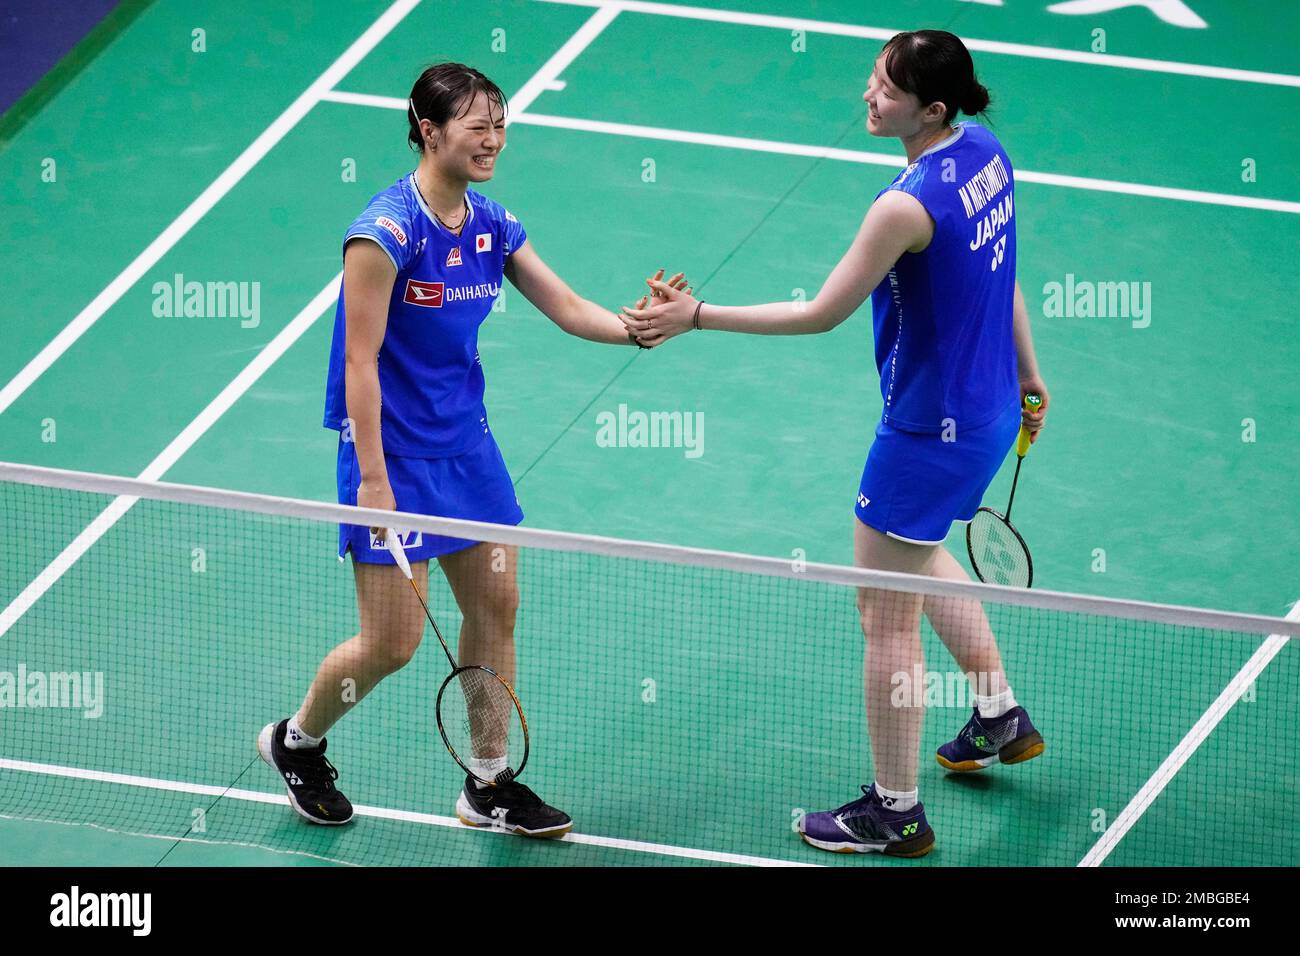 Japans Yuki Fukushima, left, and Mayu Matsumoto react after winning a point against Lanny Tria Mayasari and Jesita Puti Miantoro during their womens double qualifying match at Thomas and Uber Cup in